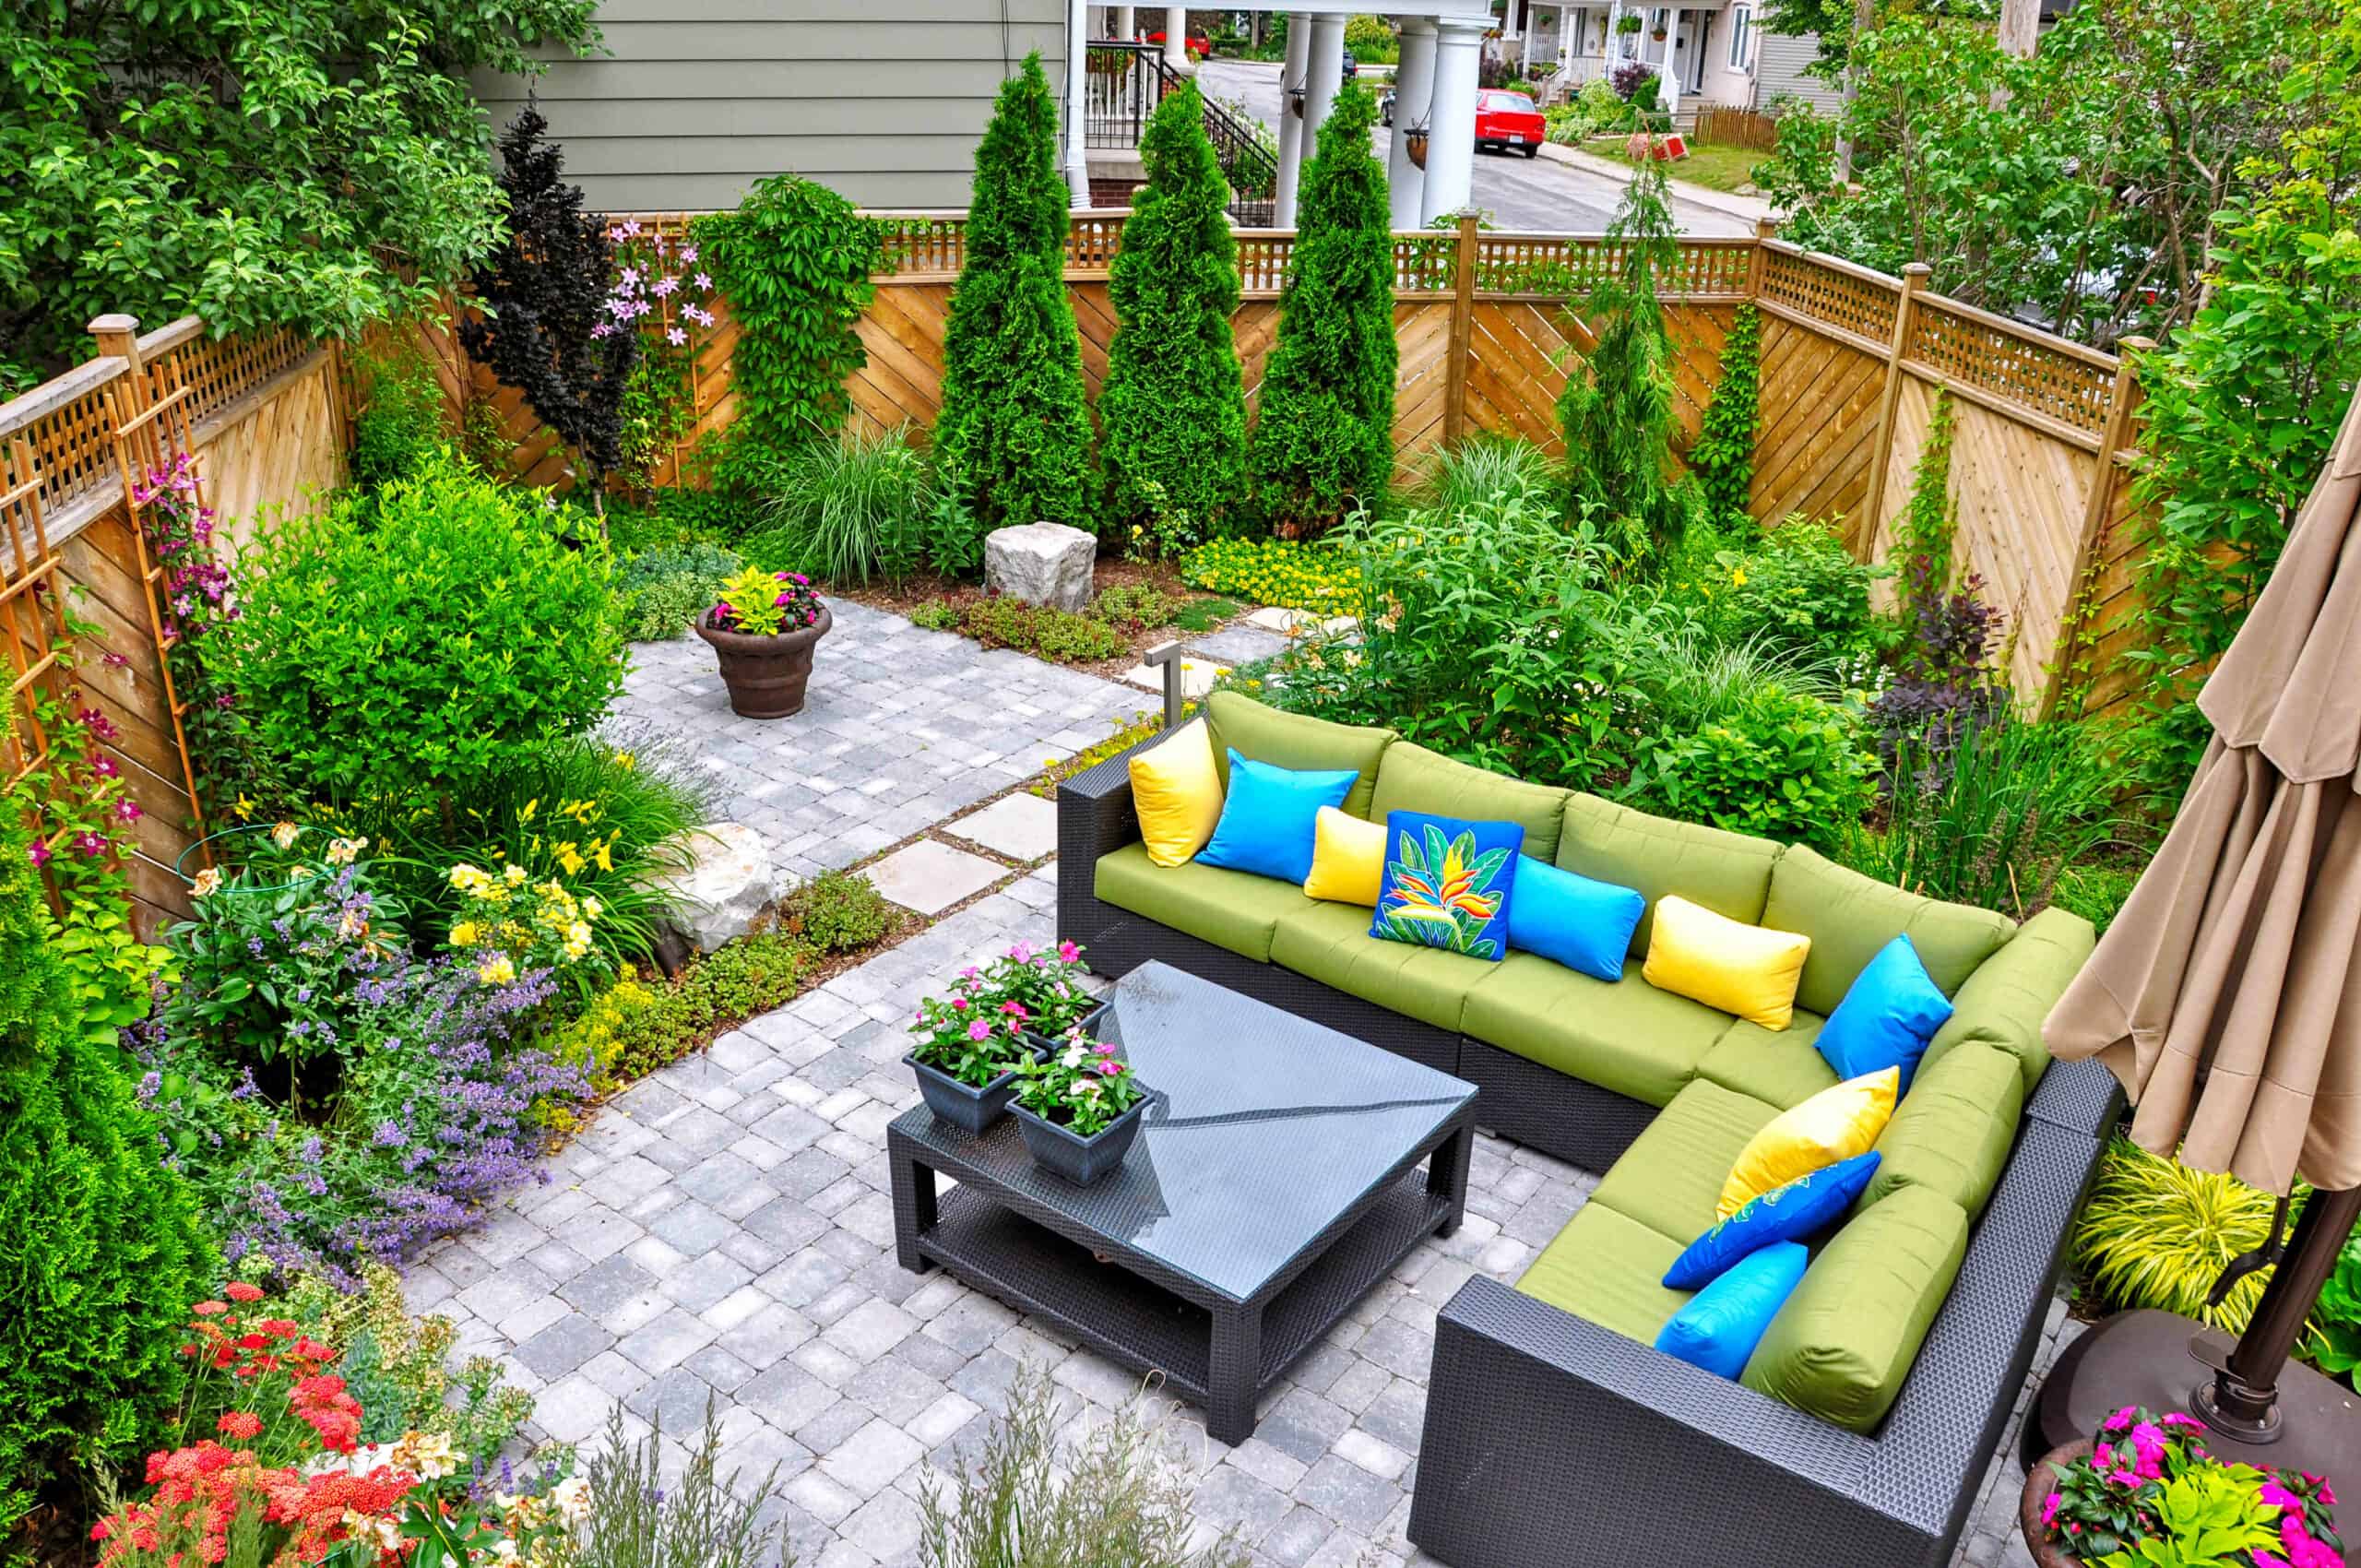 Professionally installed patios can outlast the test of time